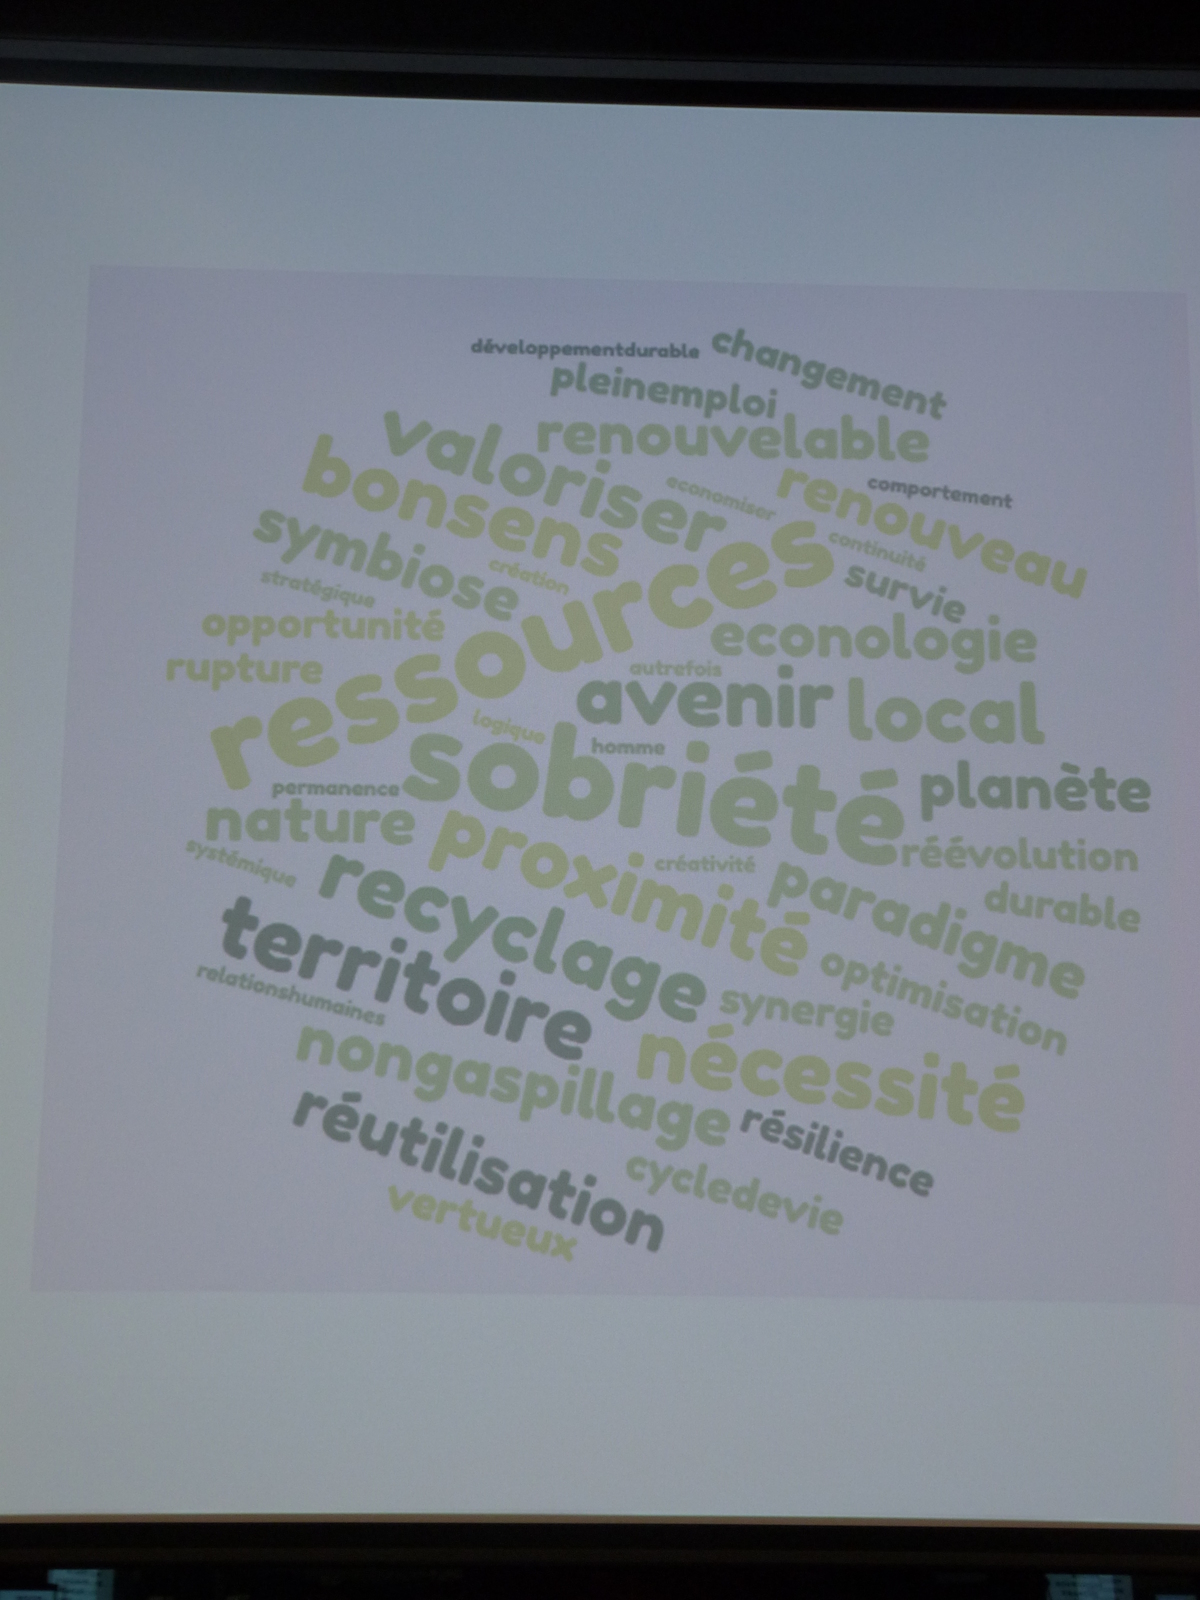 Feedback from the 1st regional circular economy forum in Bourgogne Franche-Comté